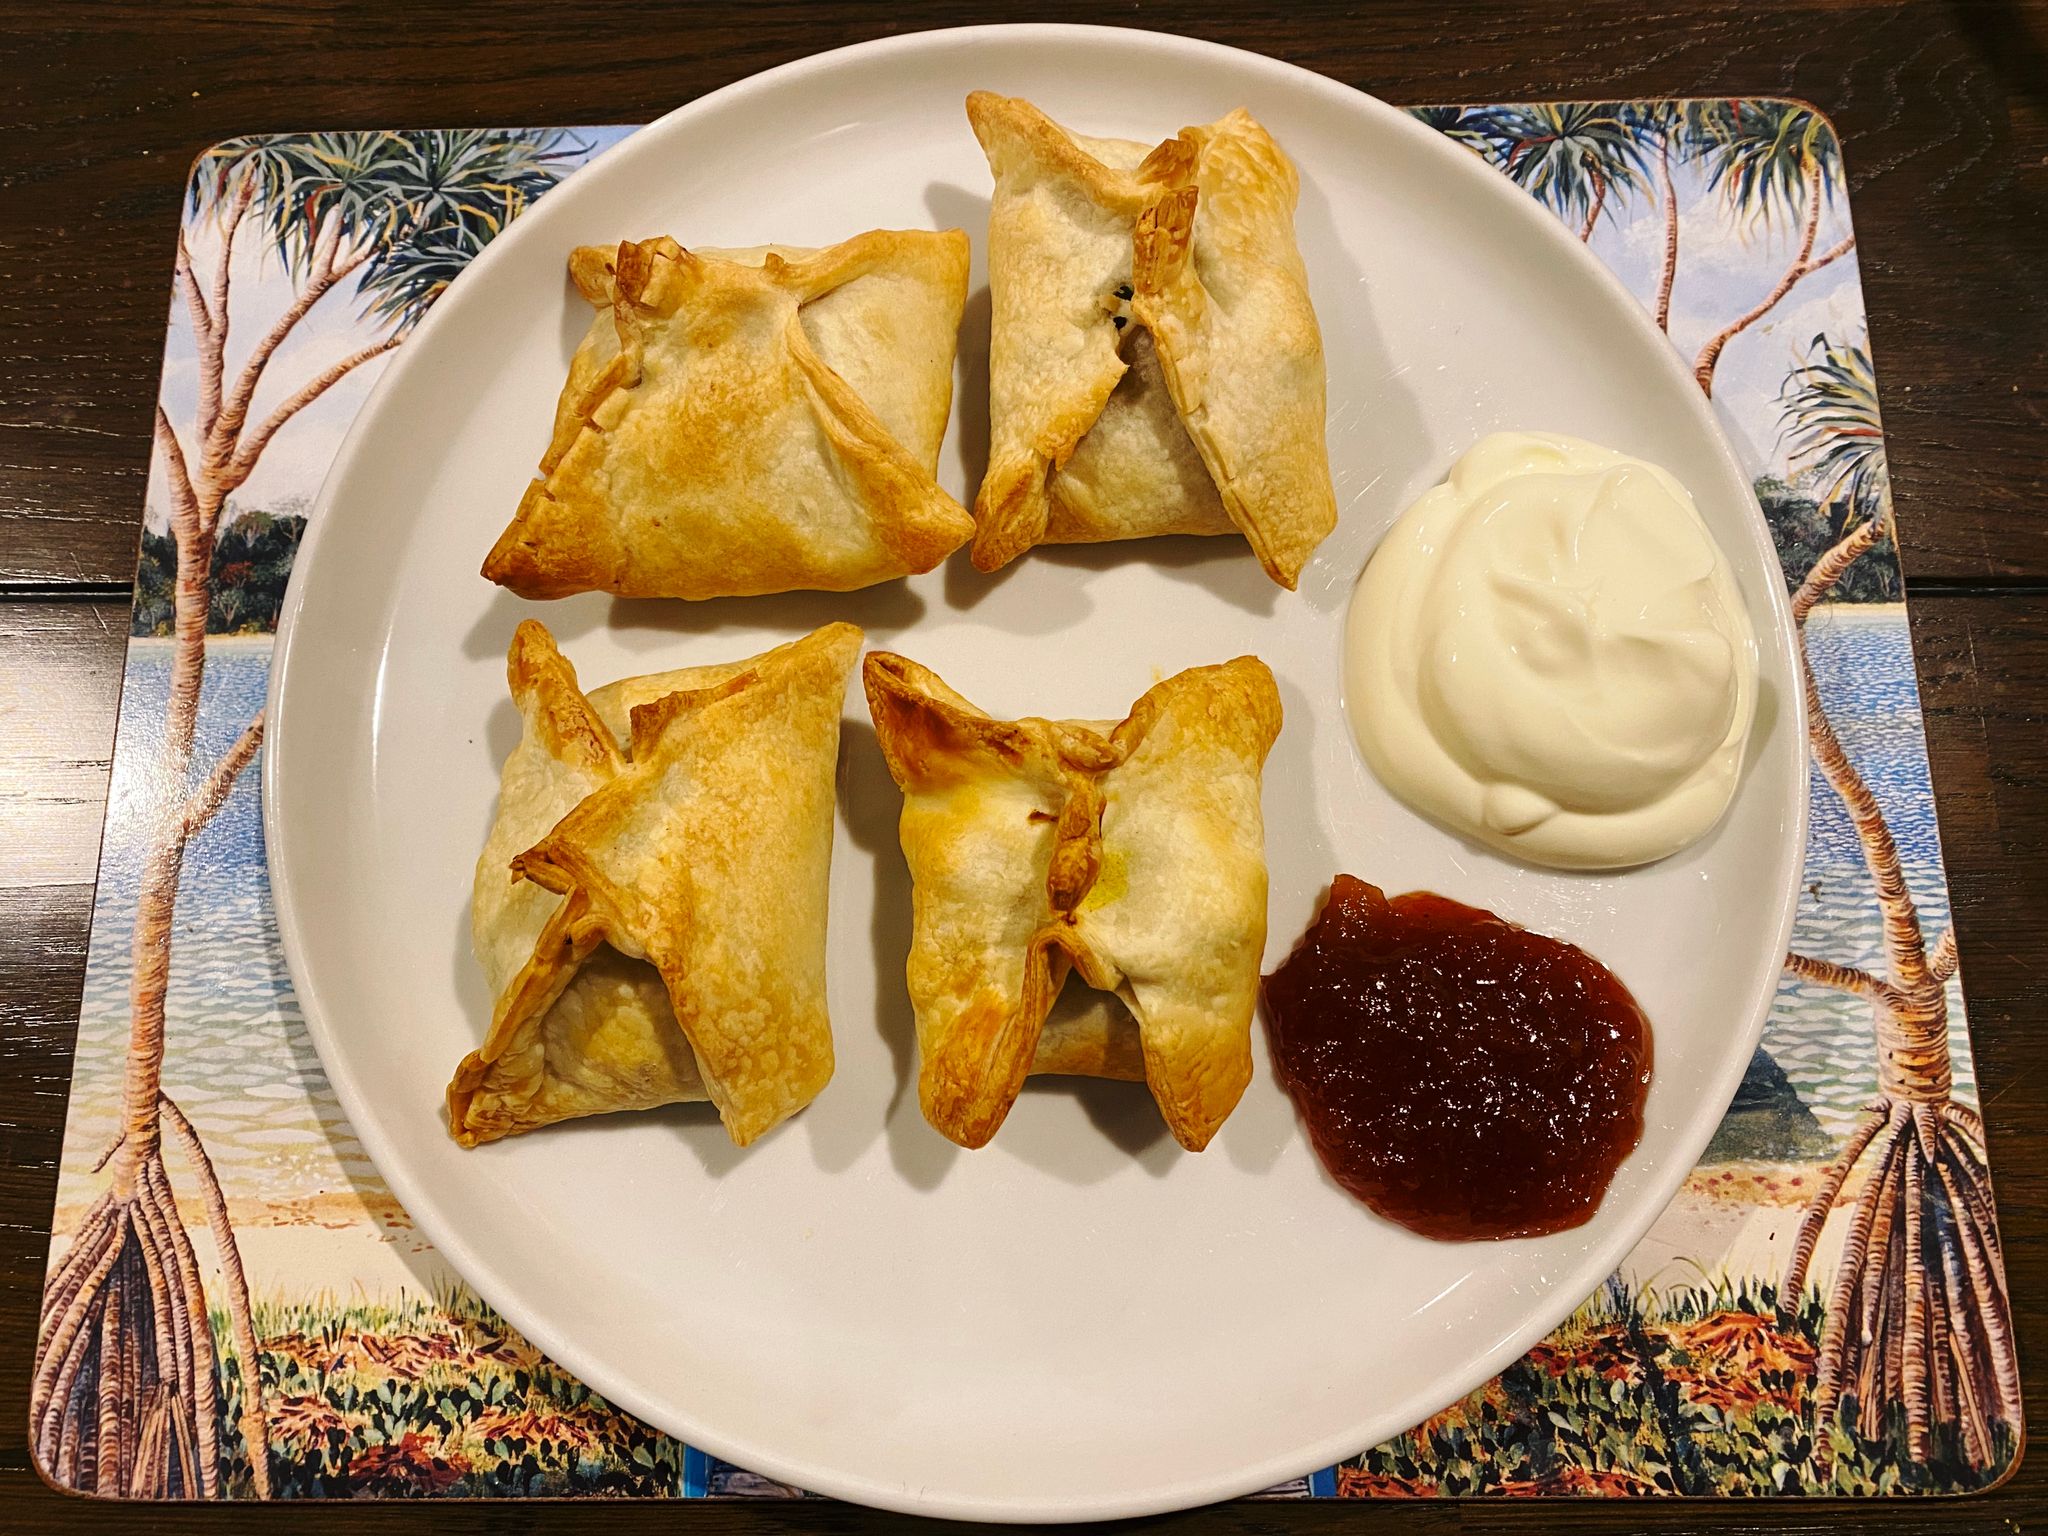 A photo of a plate with four (pyramid-shaped rather than triangular) samosas with a big dollop of yoghurt and another big dollop of mango chutney next to them.